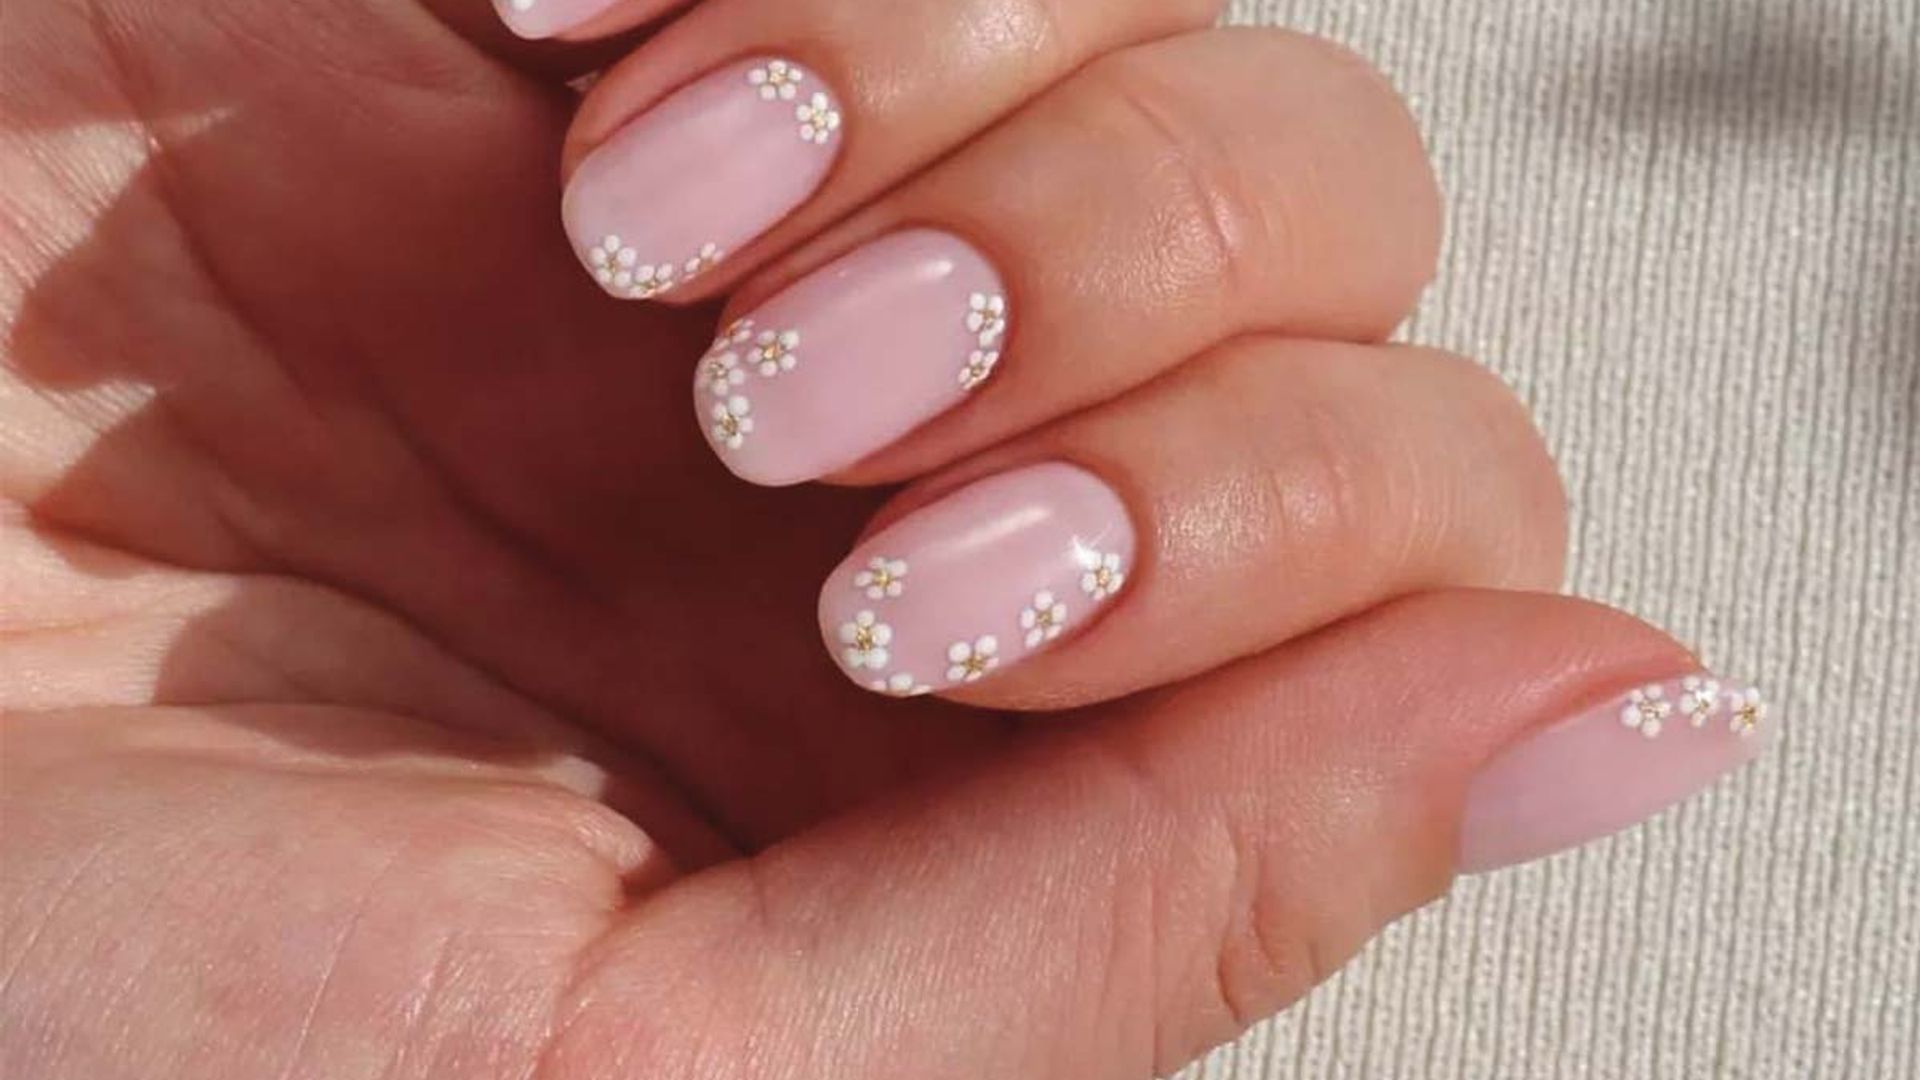 Elegant Nails by Liz - Spring Nails Design - Easy spring nail art ideas to  make your manicure stand out this season with geometric designs.⁠ ⁠ ⁠⁠Book  your appointment ☎️ (587)-435 8627⁠ ⁠